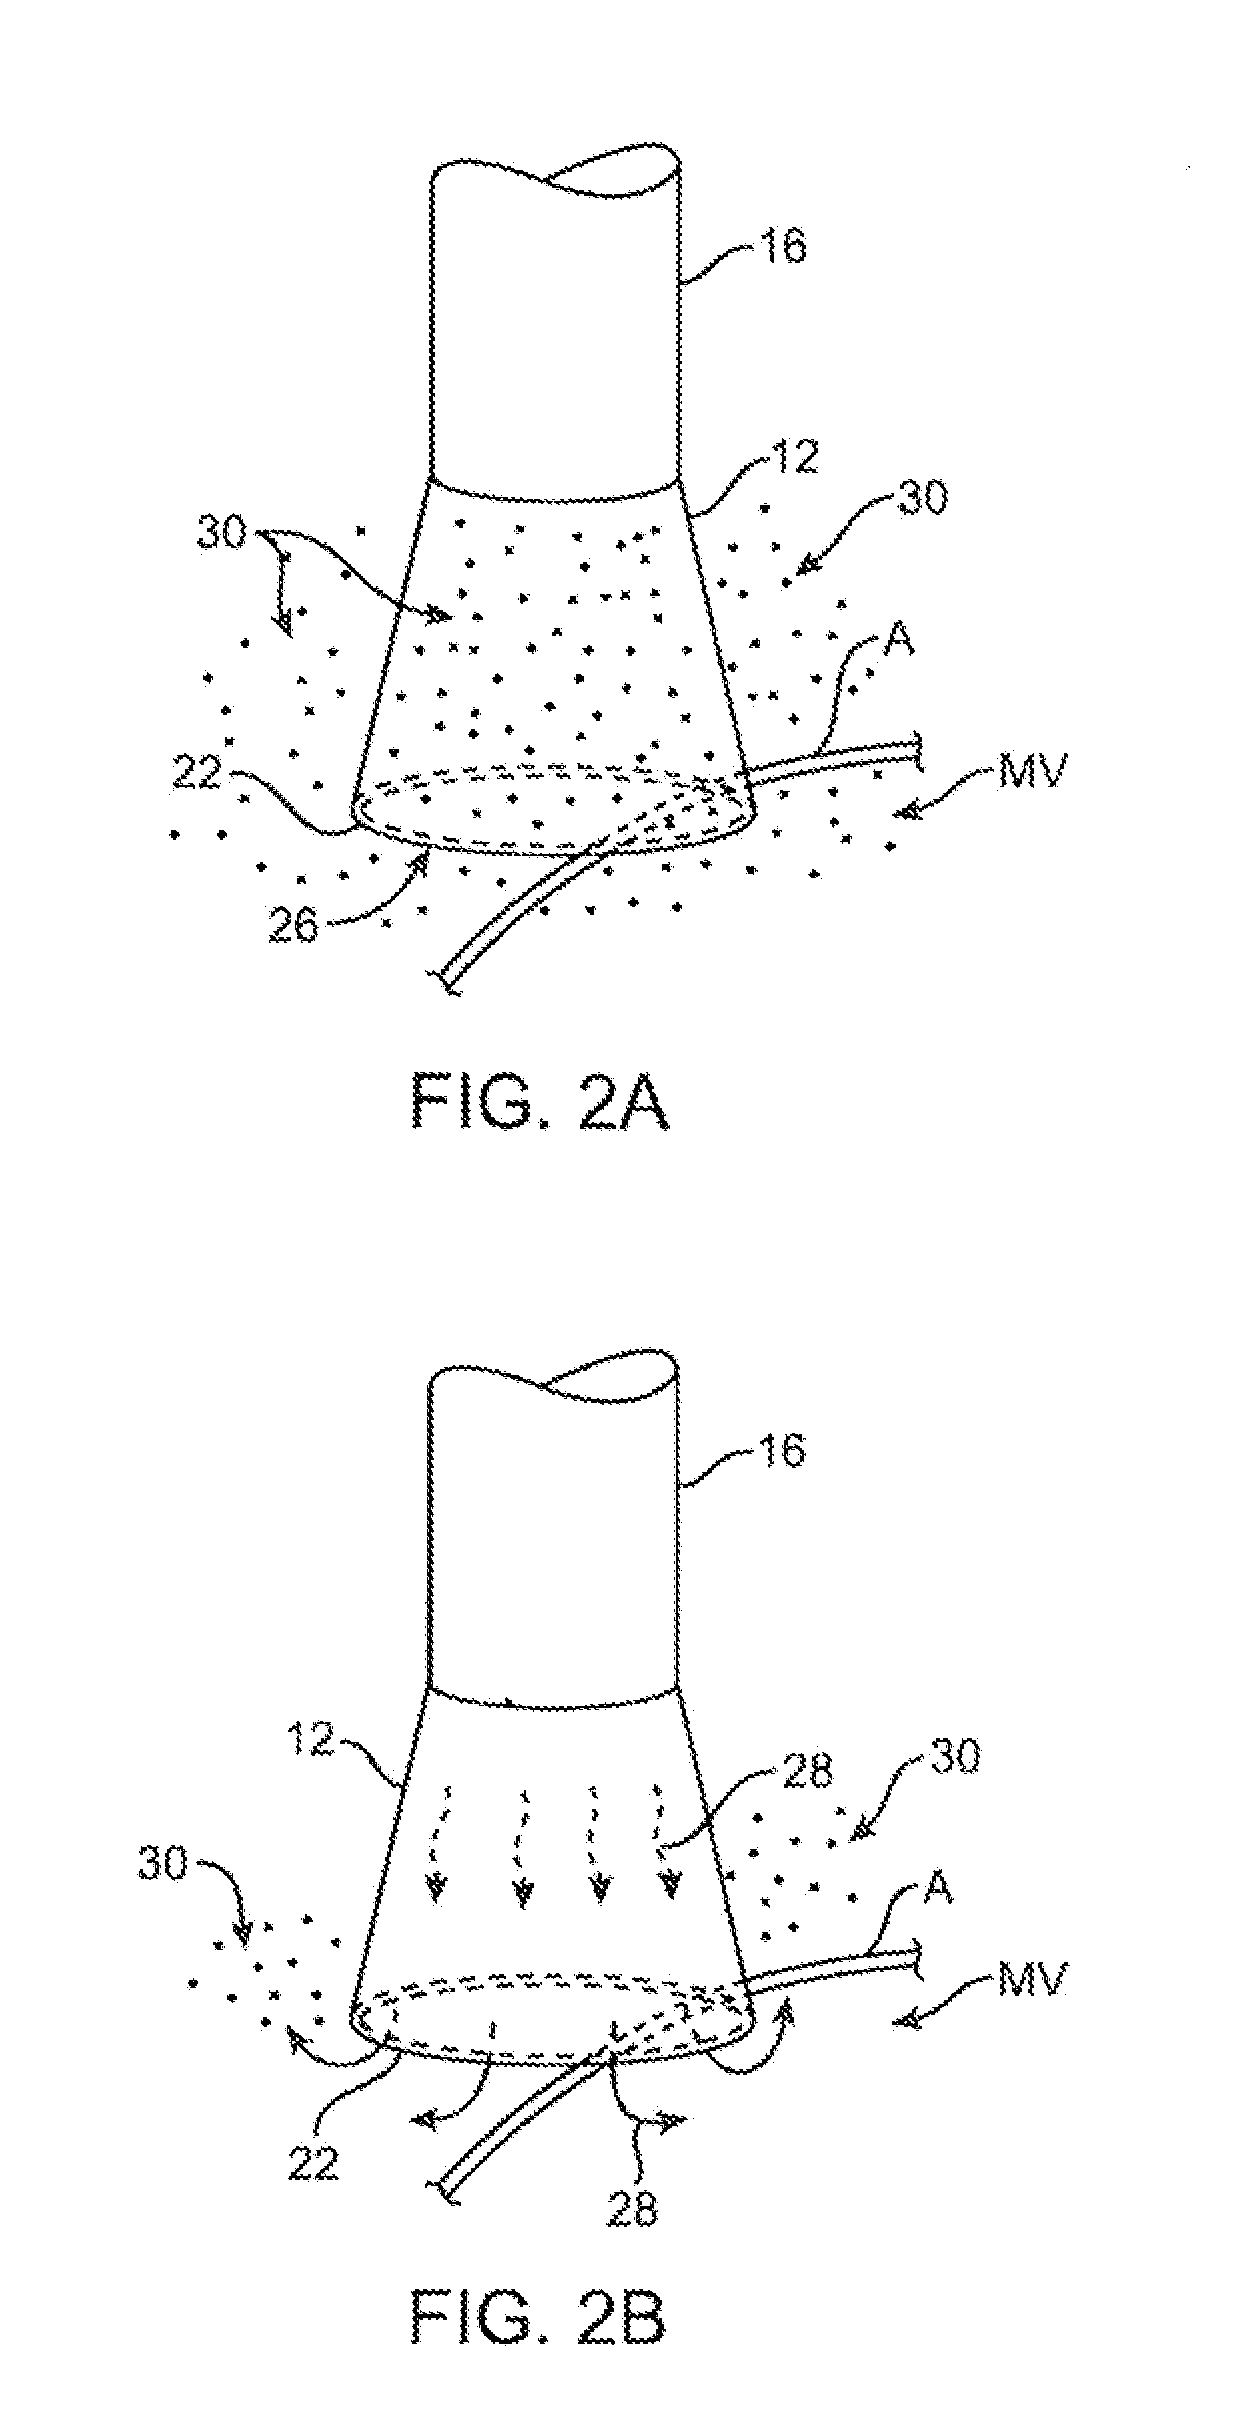 Electrode placement and connection systems